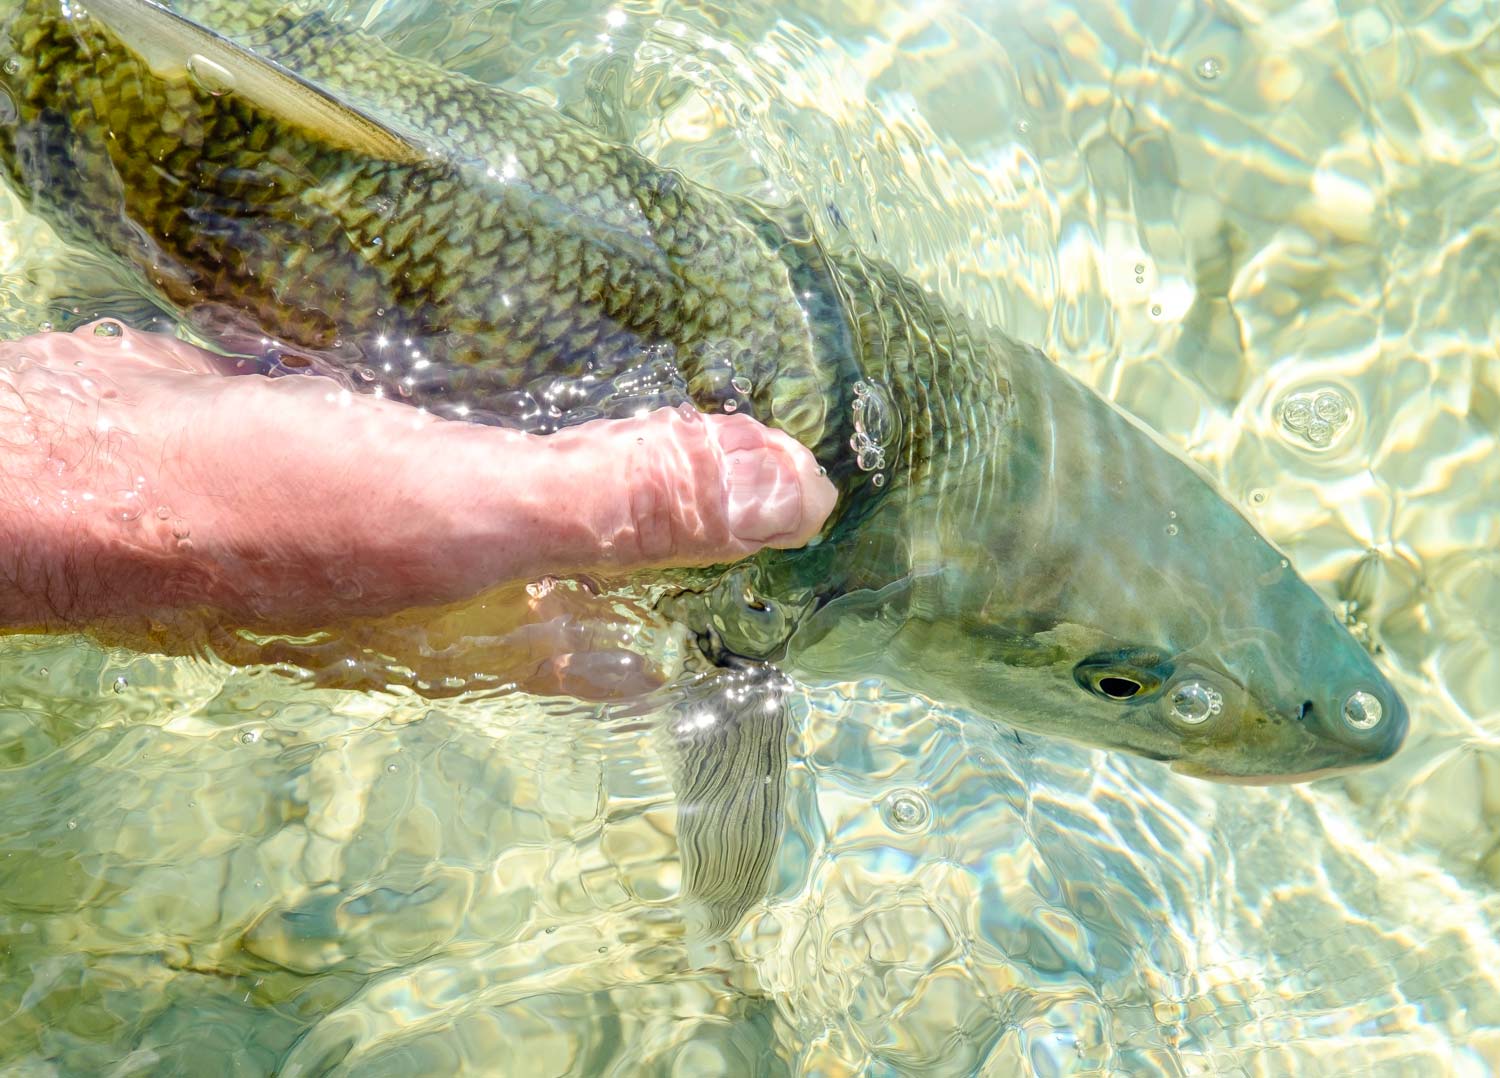 A Beginner's Guide to Catching Bonefish - Fly Fishing